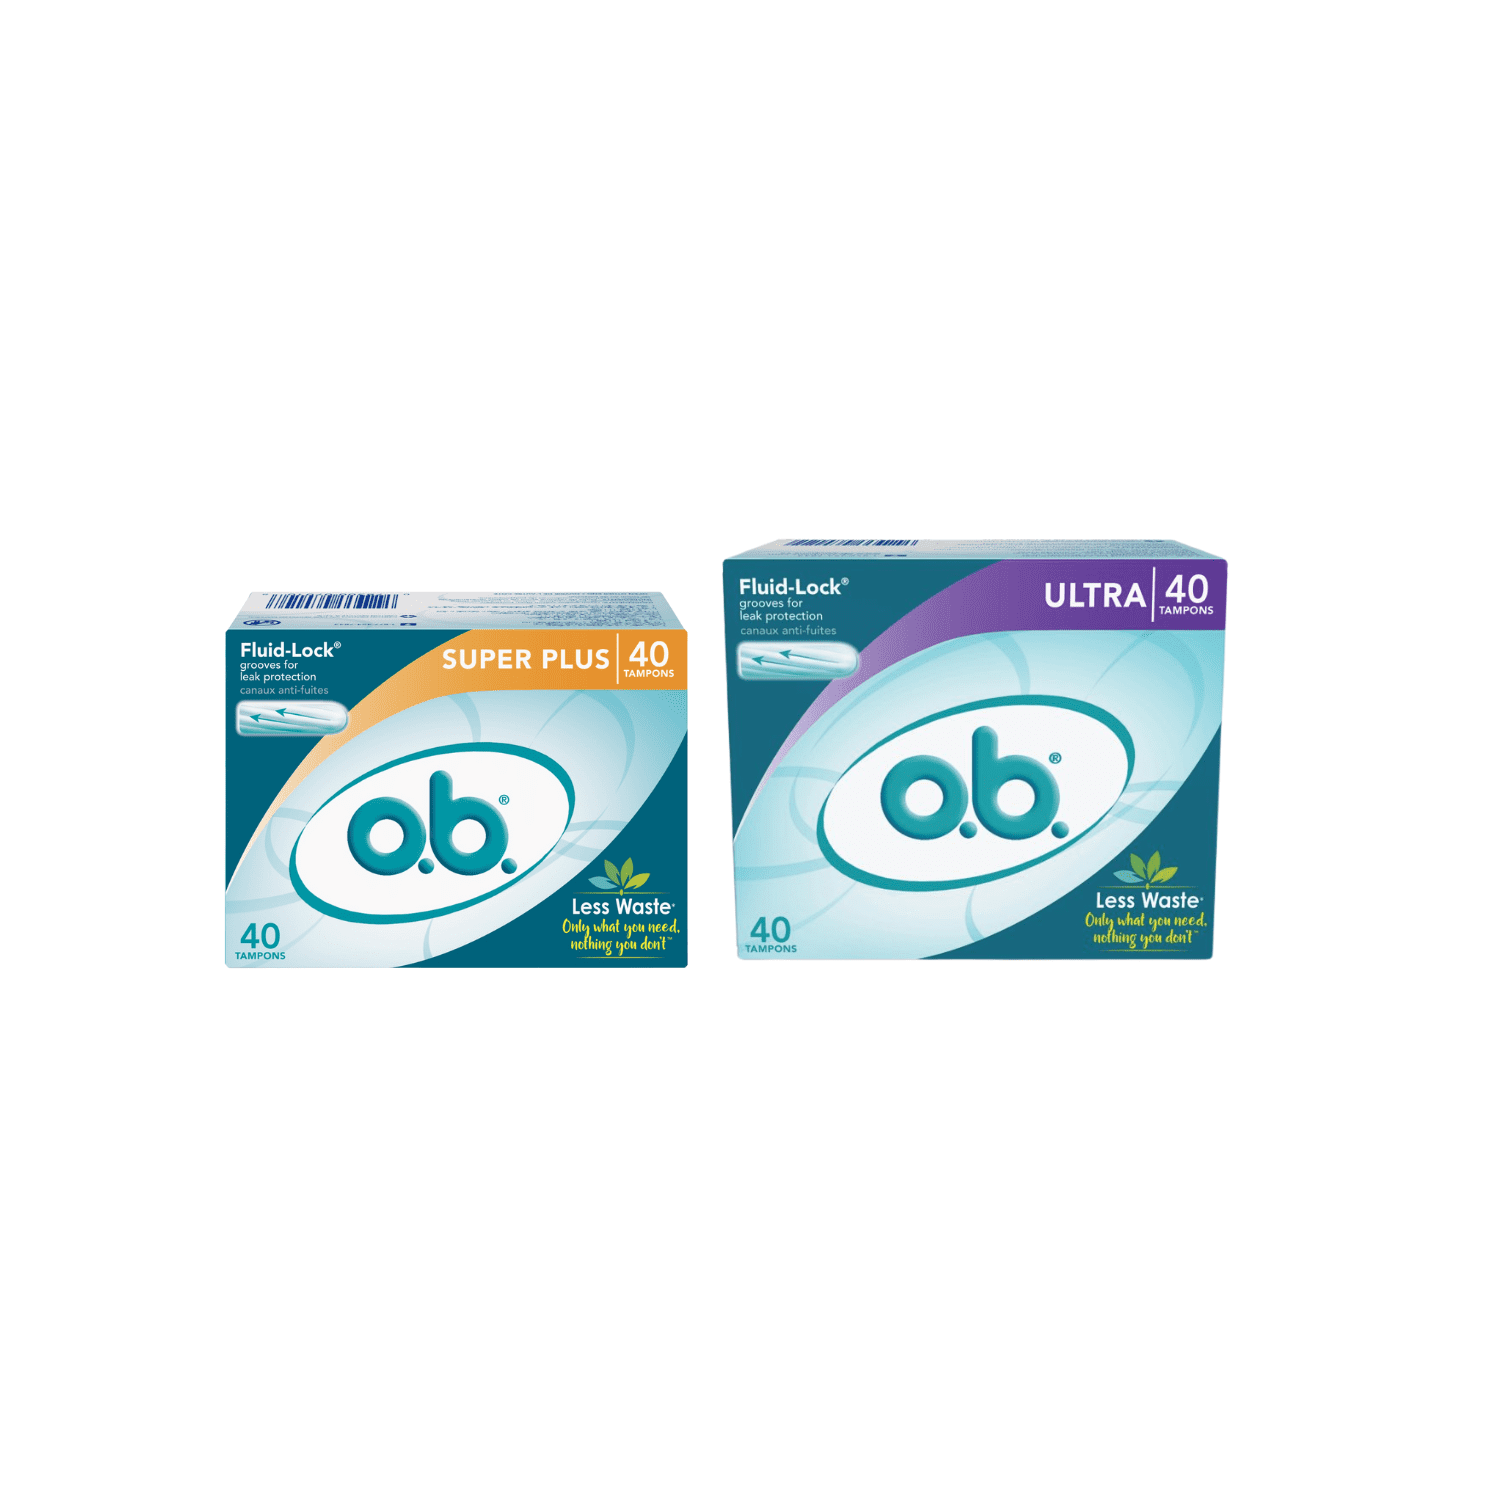 ob Tampons Multipack, Super, Ultra Absorbency Tampons Fluid Lock, with  eBooklet – Set of 4 (120 Tampons)